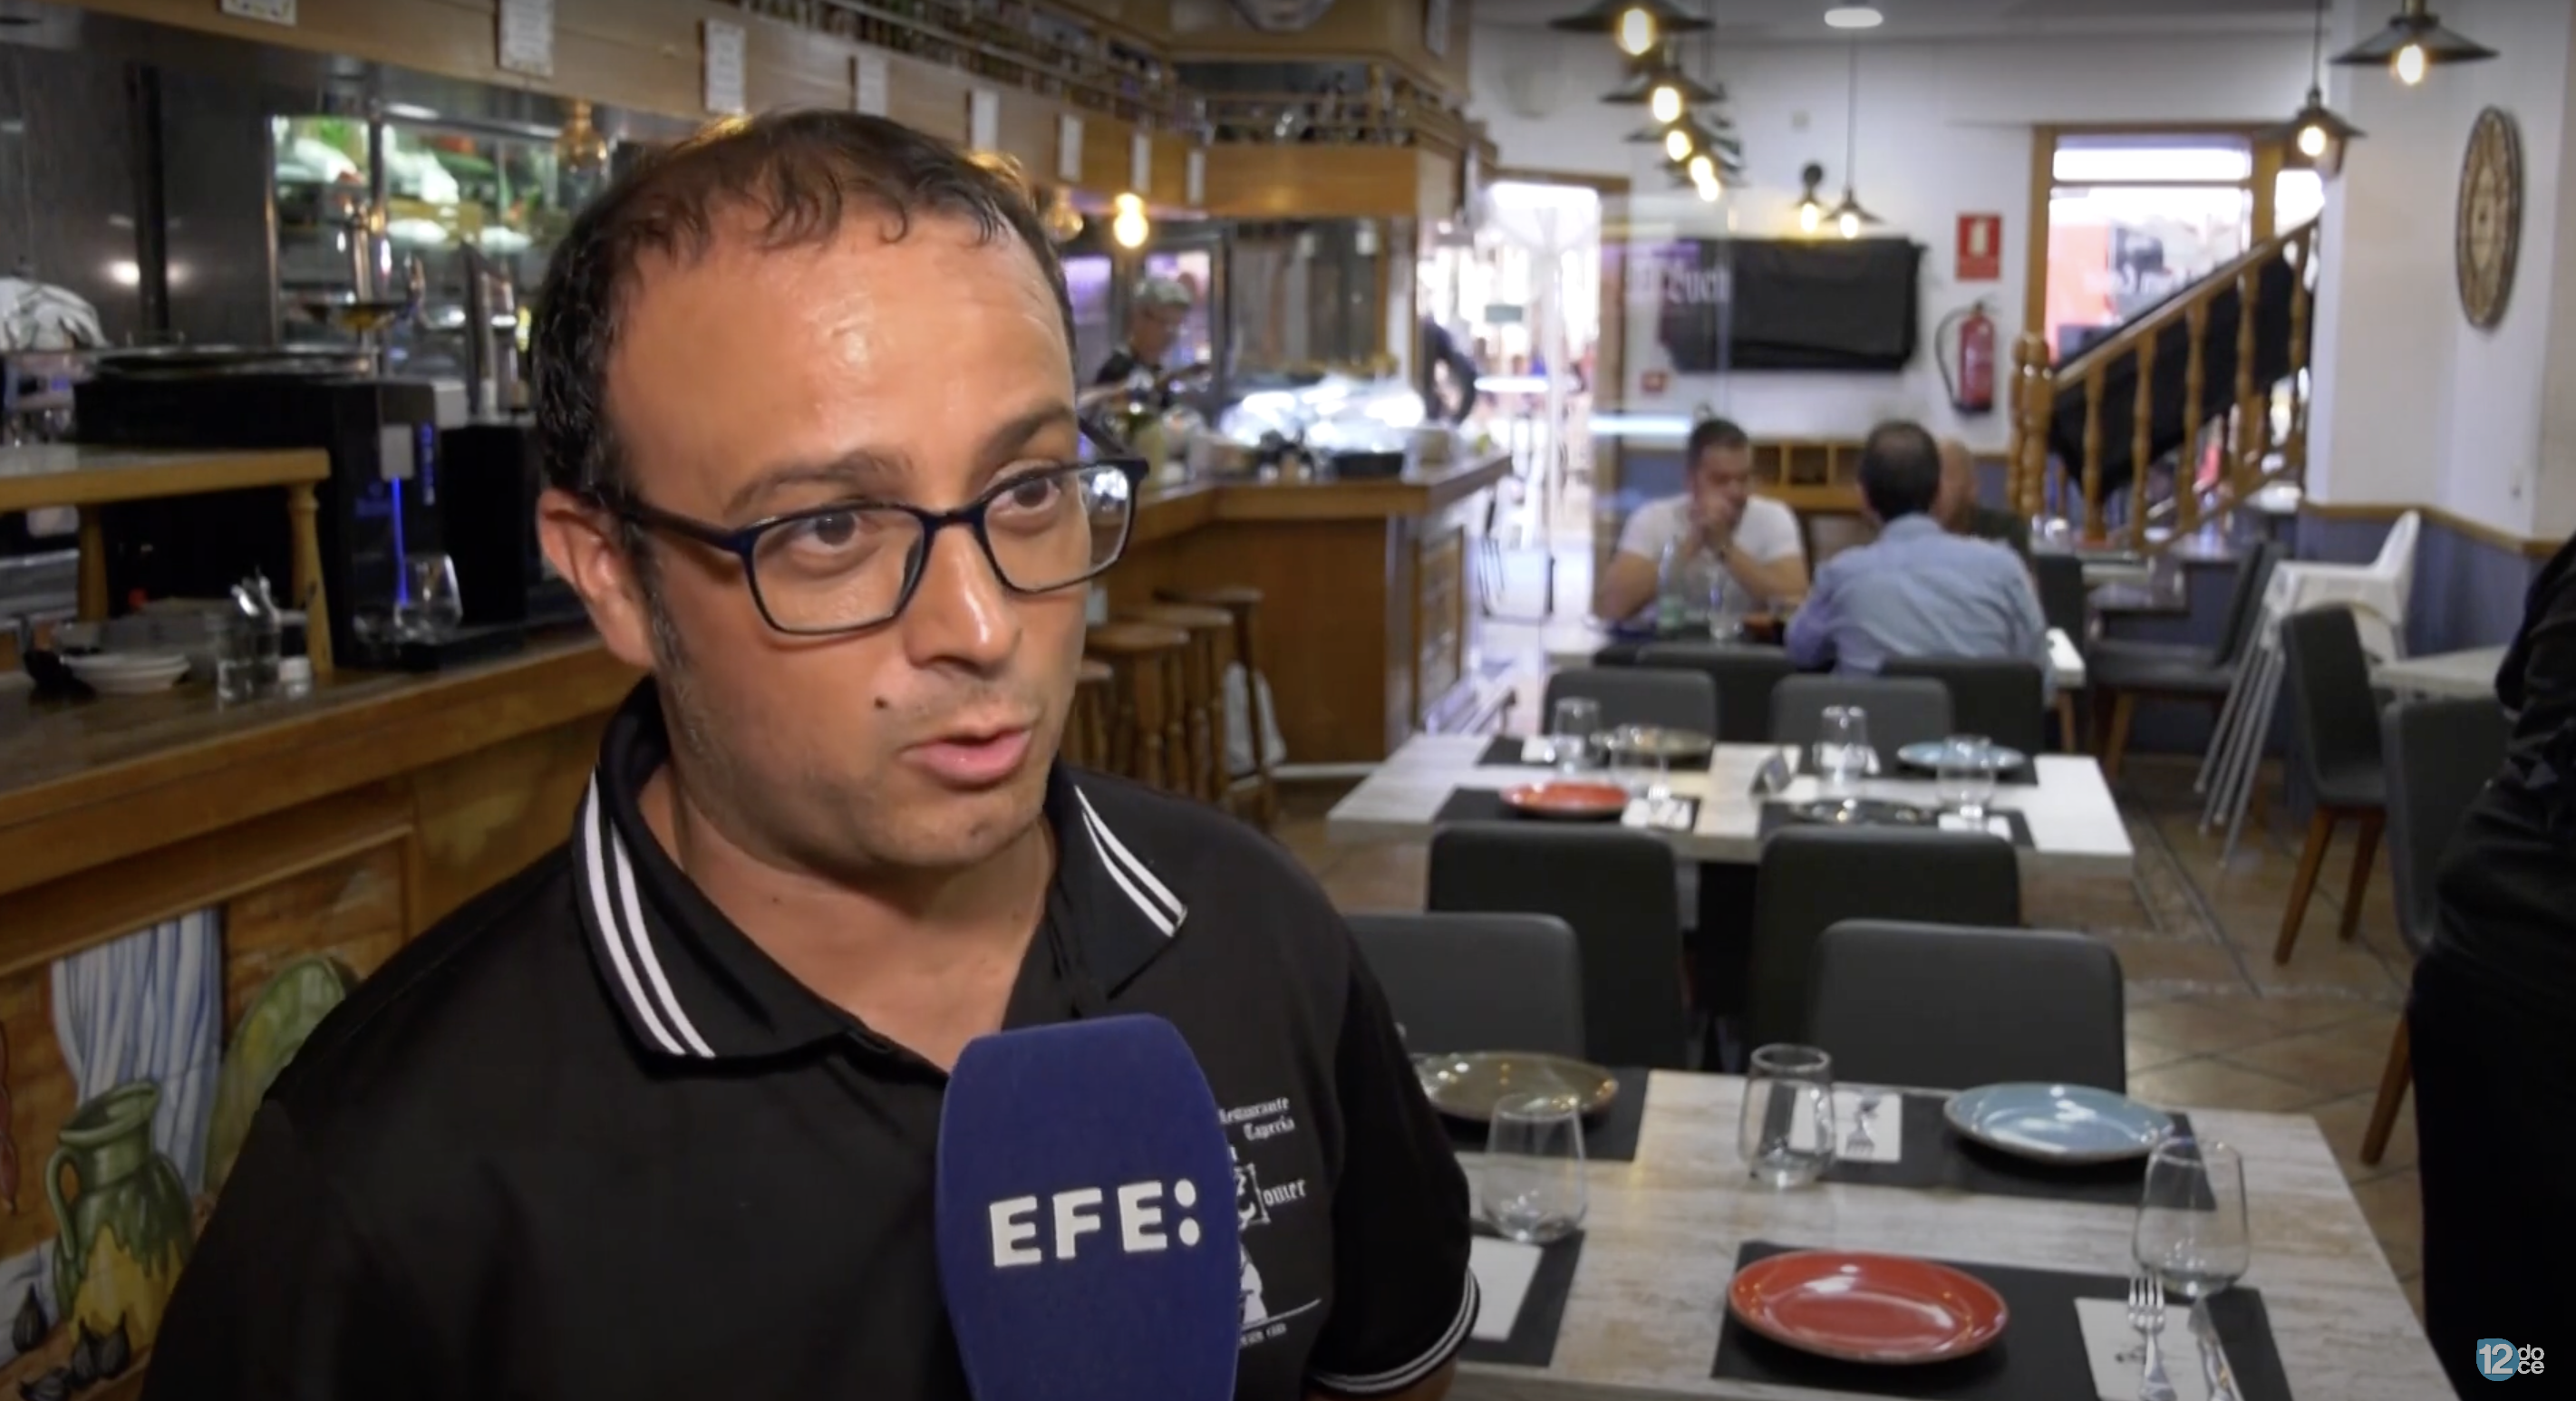 Moisés Doménech, owner of the restaurant El Buen Comer, speaking about the dine-and-dash expat in a video dated September 21, 2023 | Source: youtube.com/@12tv_es